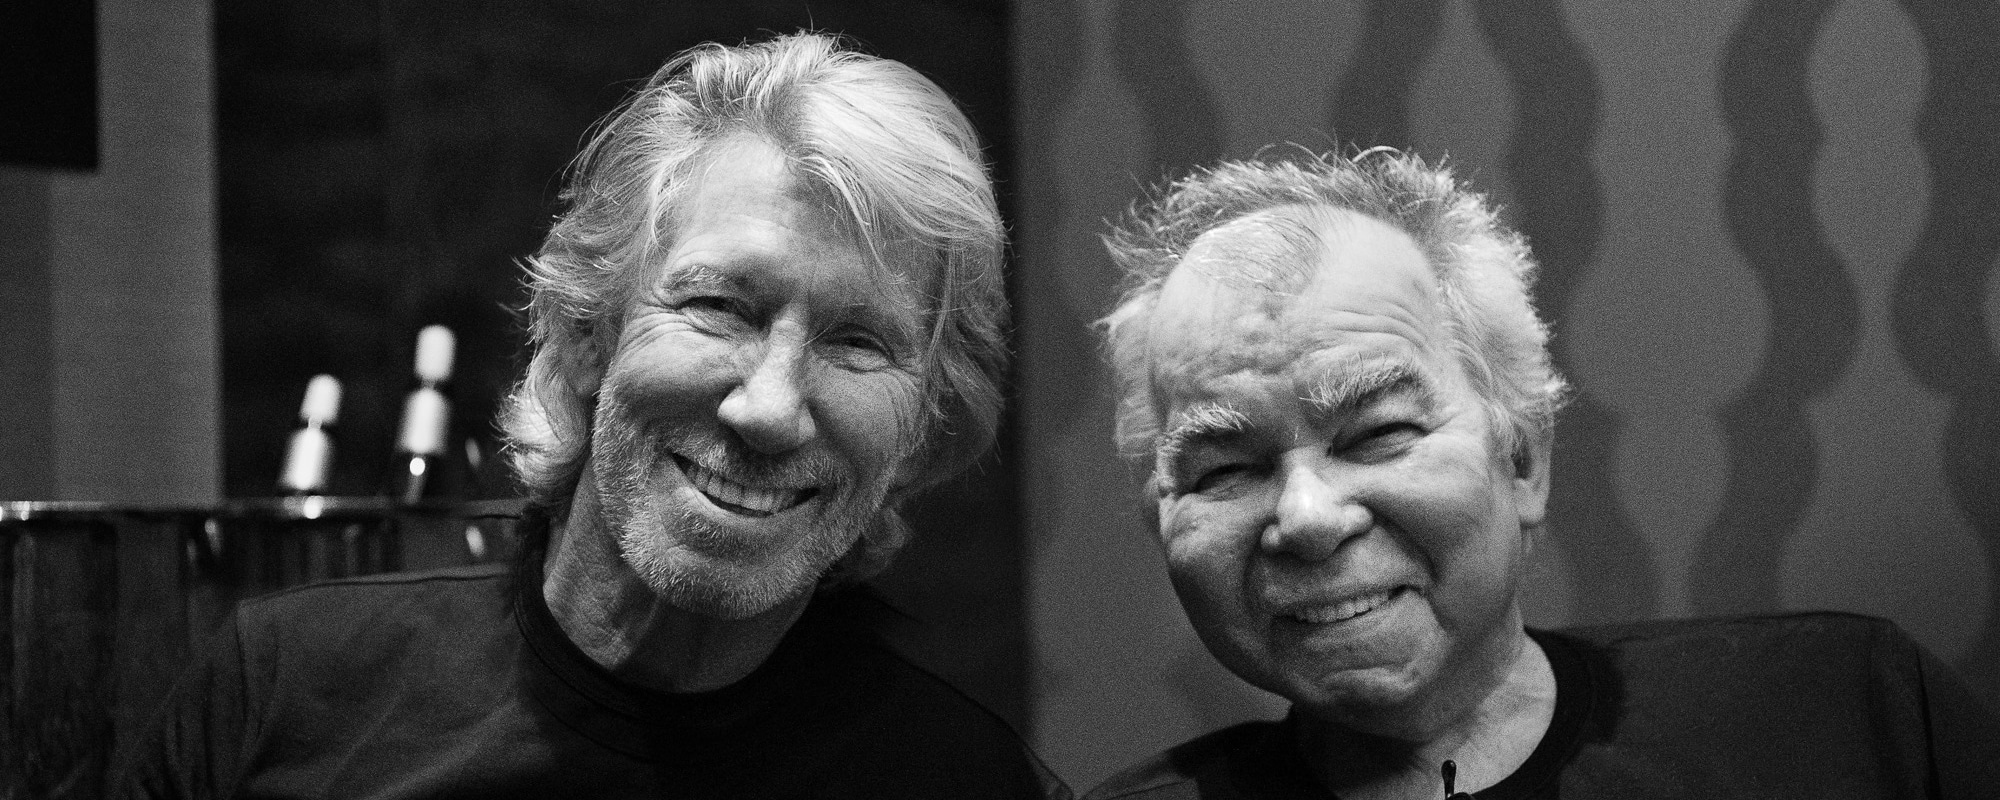 Check Out the Second Part of Roger Waters’ Conversation on Prine Time